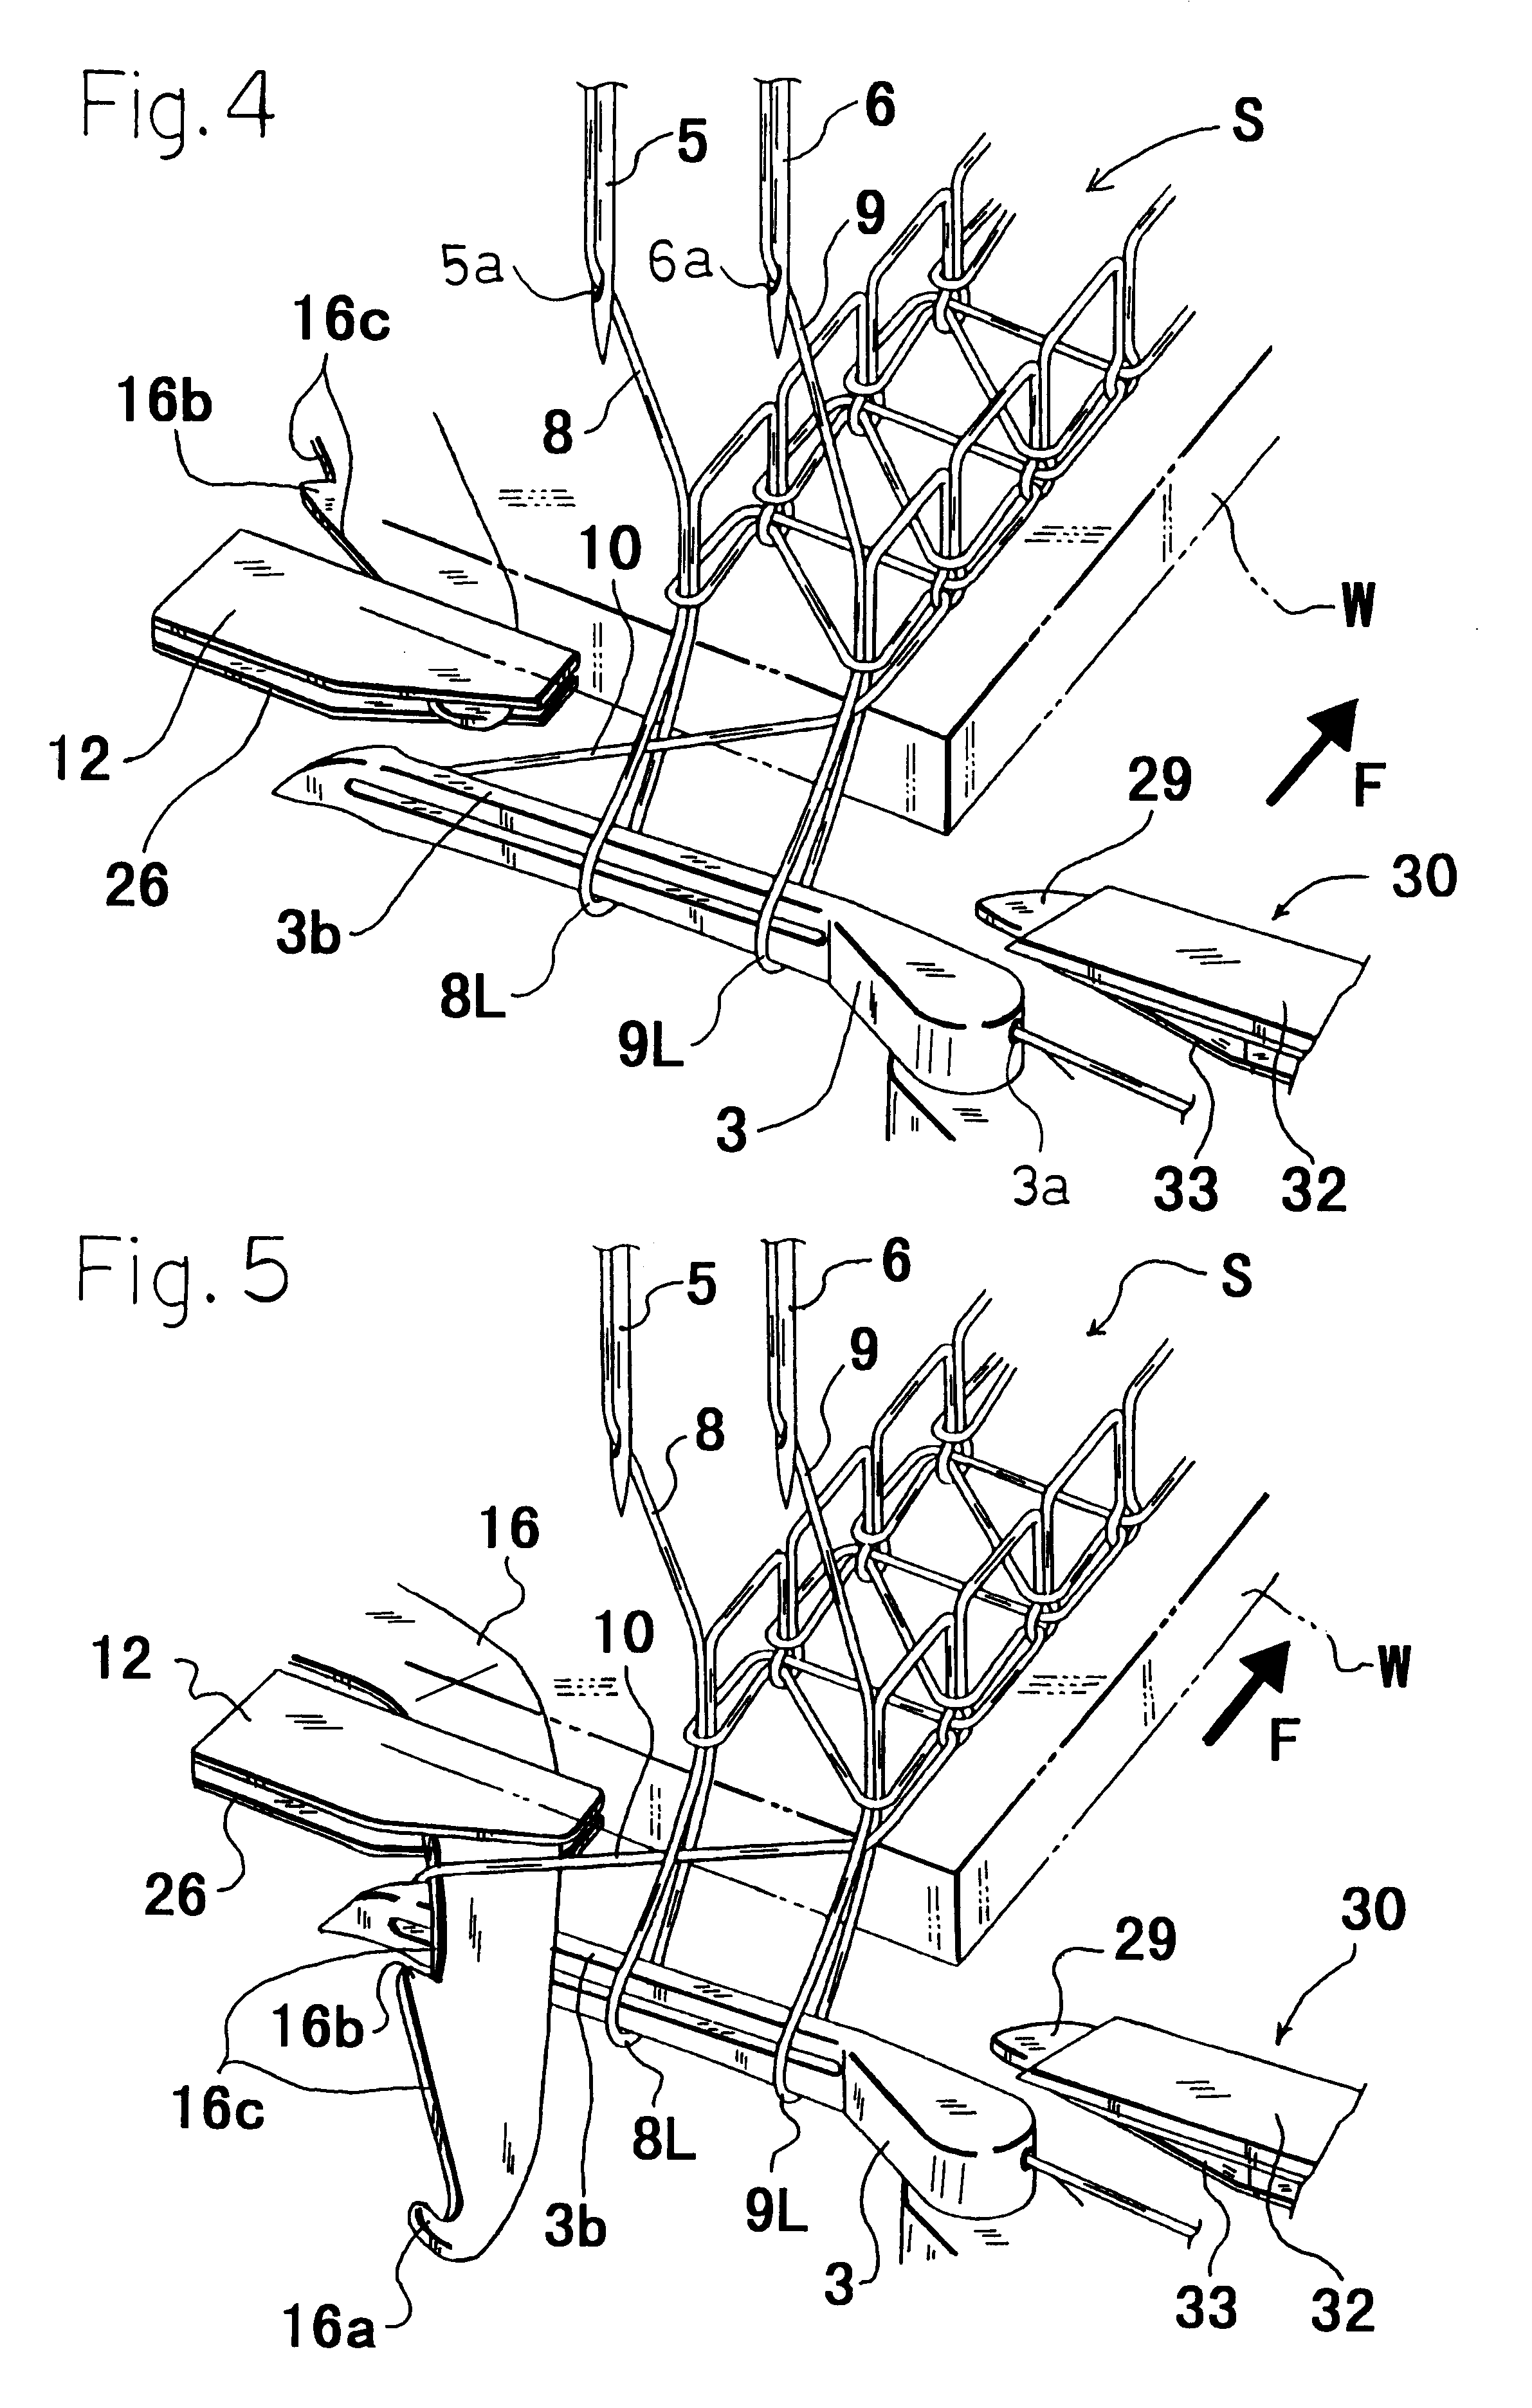 Apparatus for preventing stitching from raveling